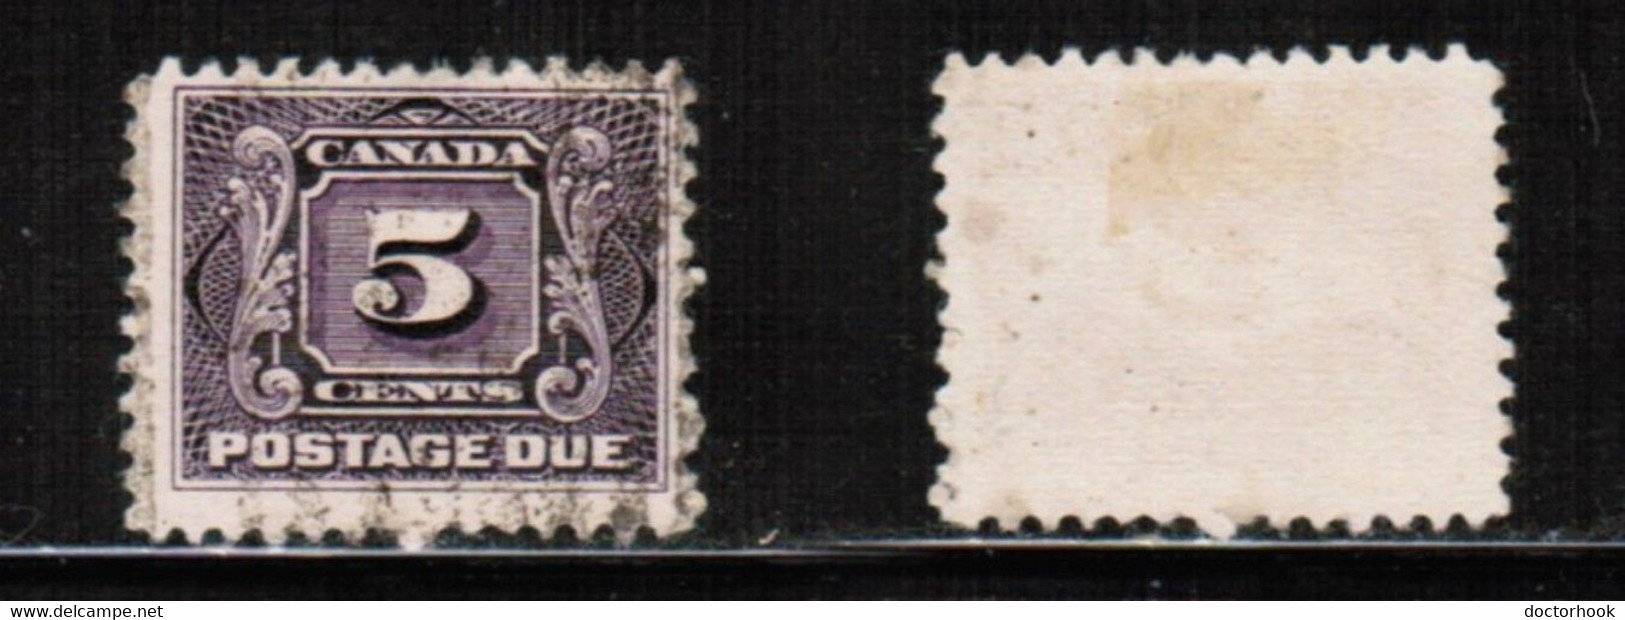 CANADA   Scott # J 4 USED (CONDITION AS PER SCAN) (CAN-101) - Port Dû (Taxe)